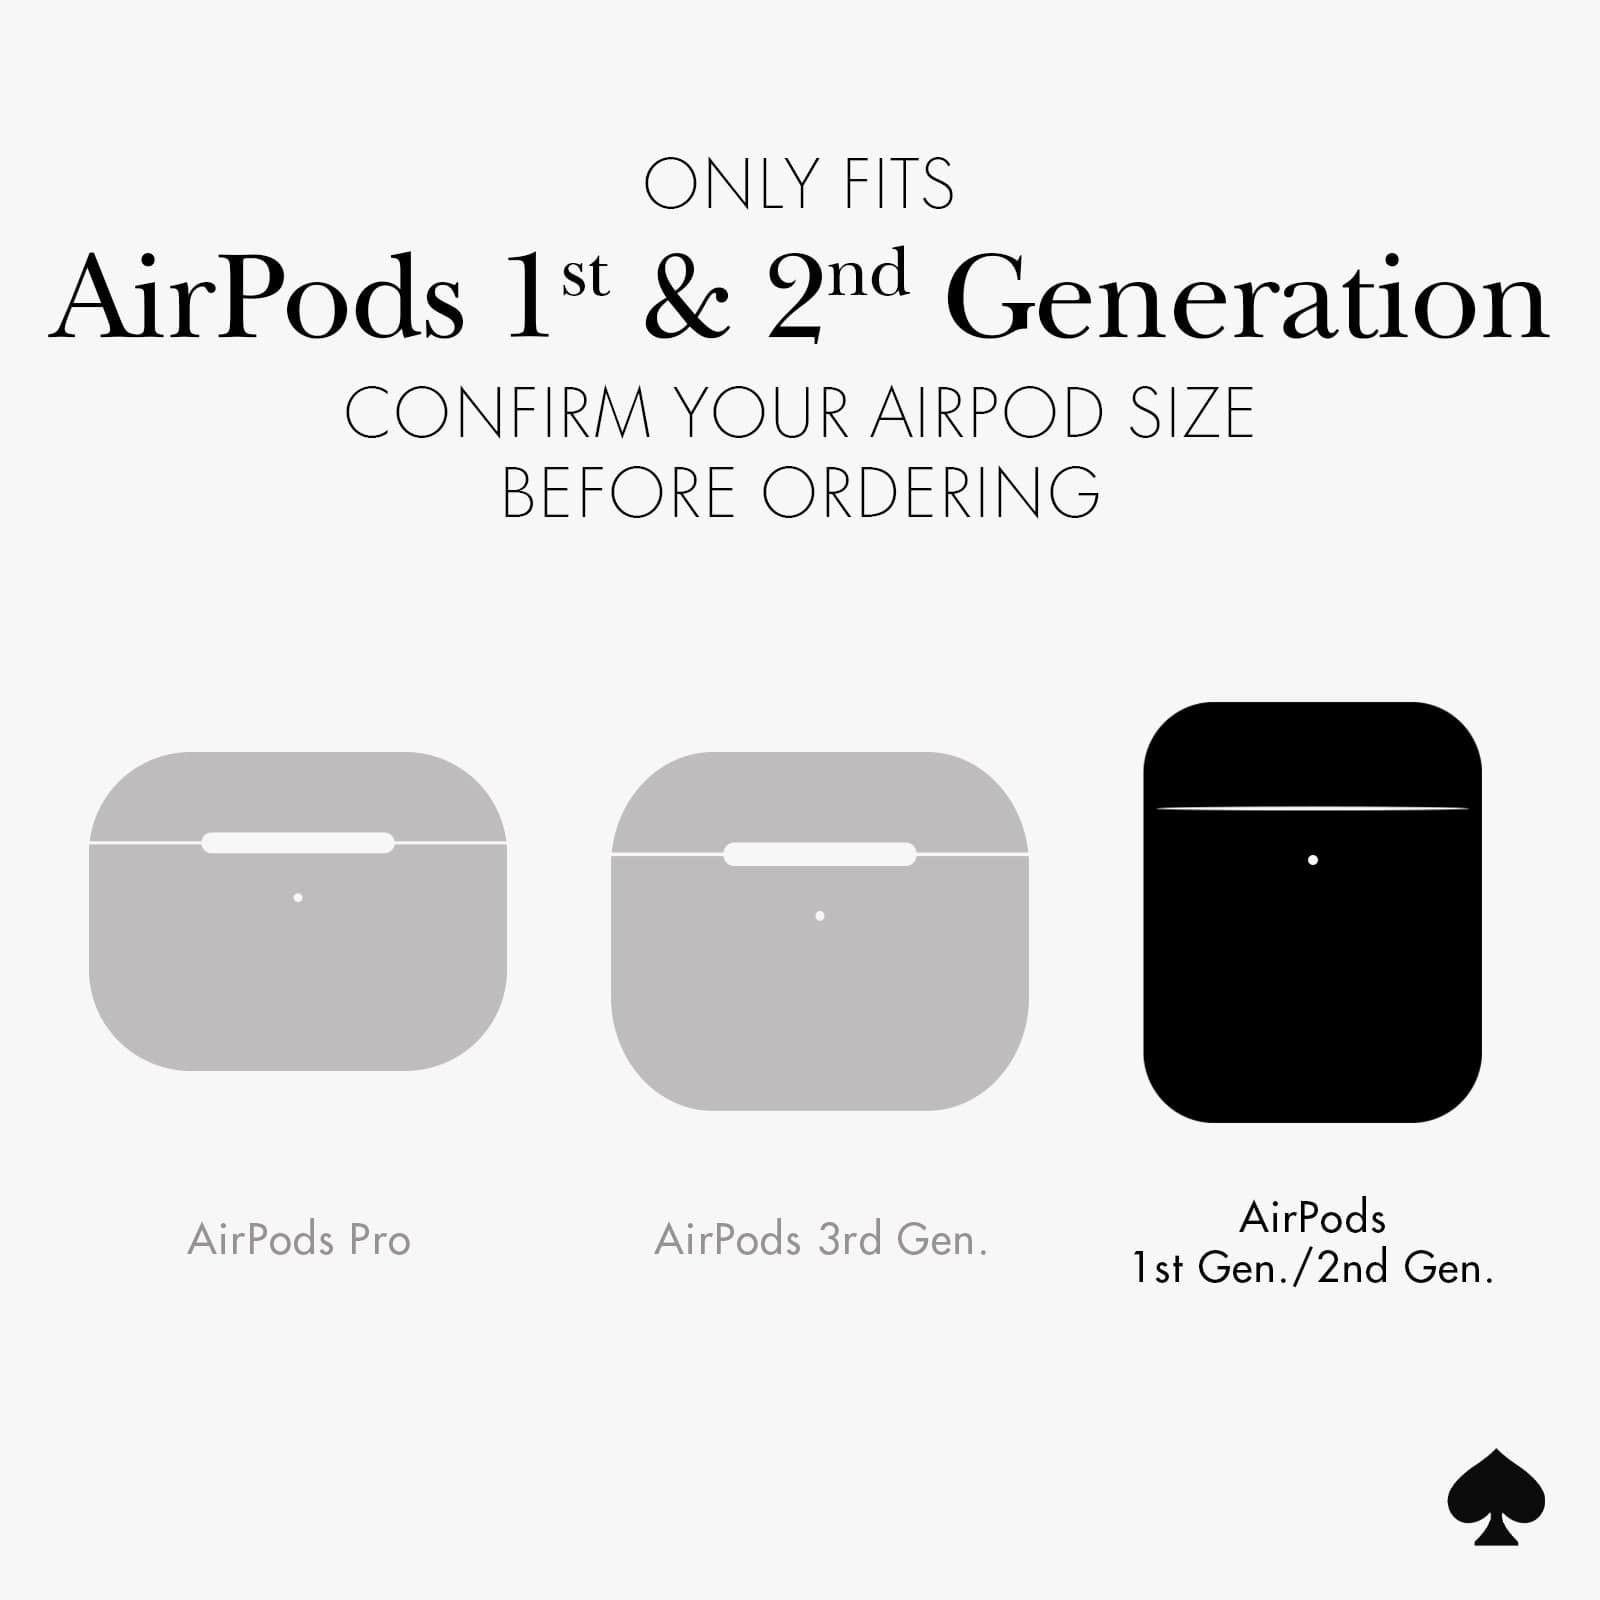 ONLY FITS AIRPODS 1ST AND 2ND GENERATION. CONFIRM YOUR AIRPOD SIZE BEFORE ORDERING